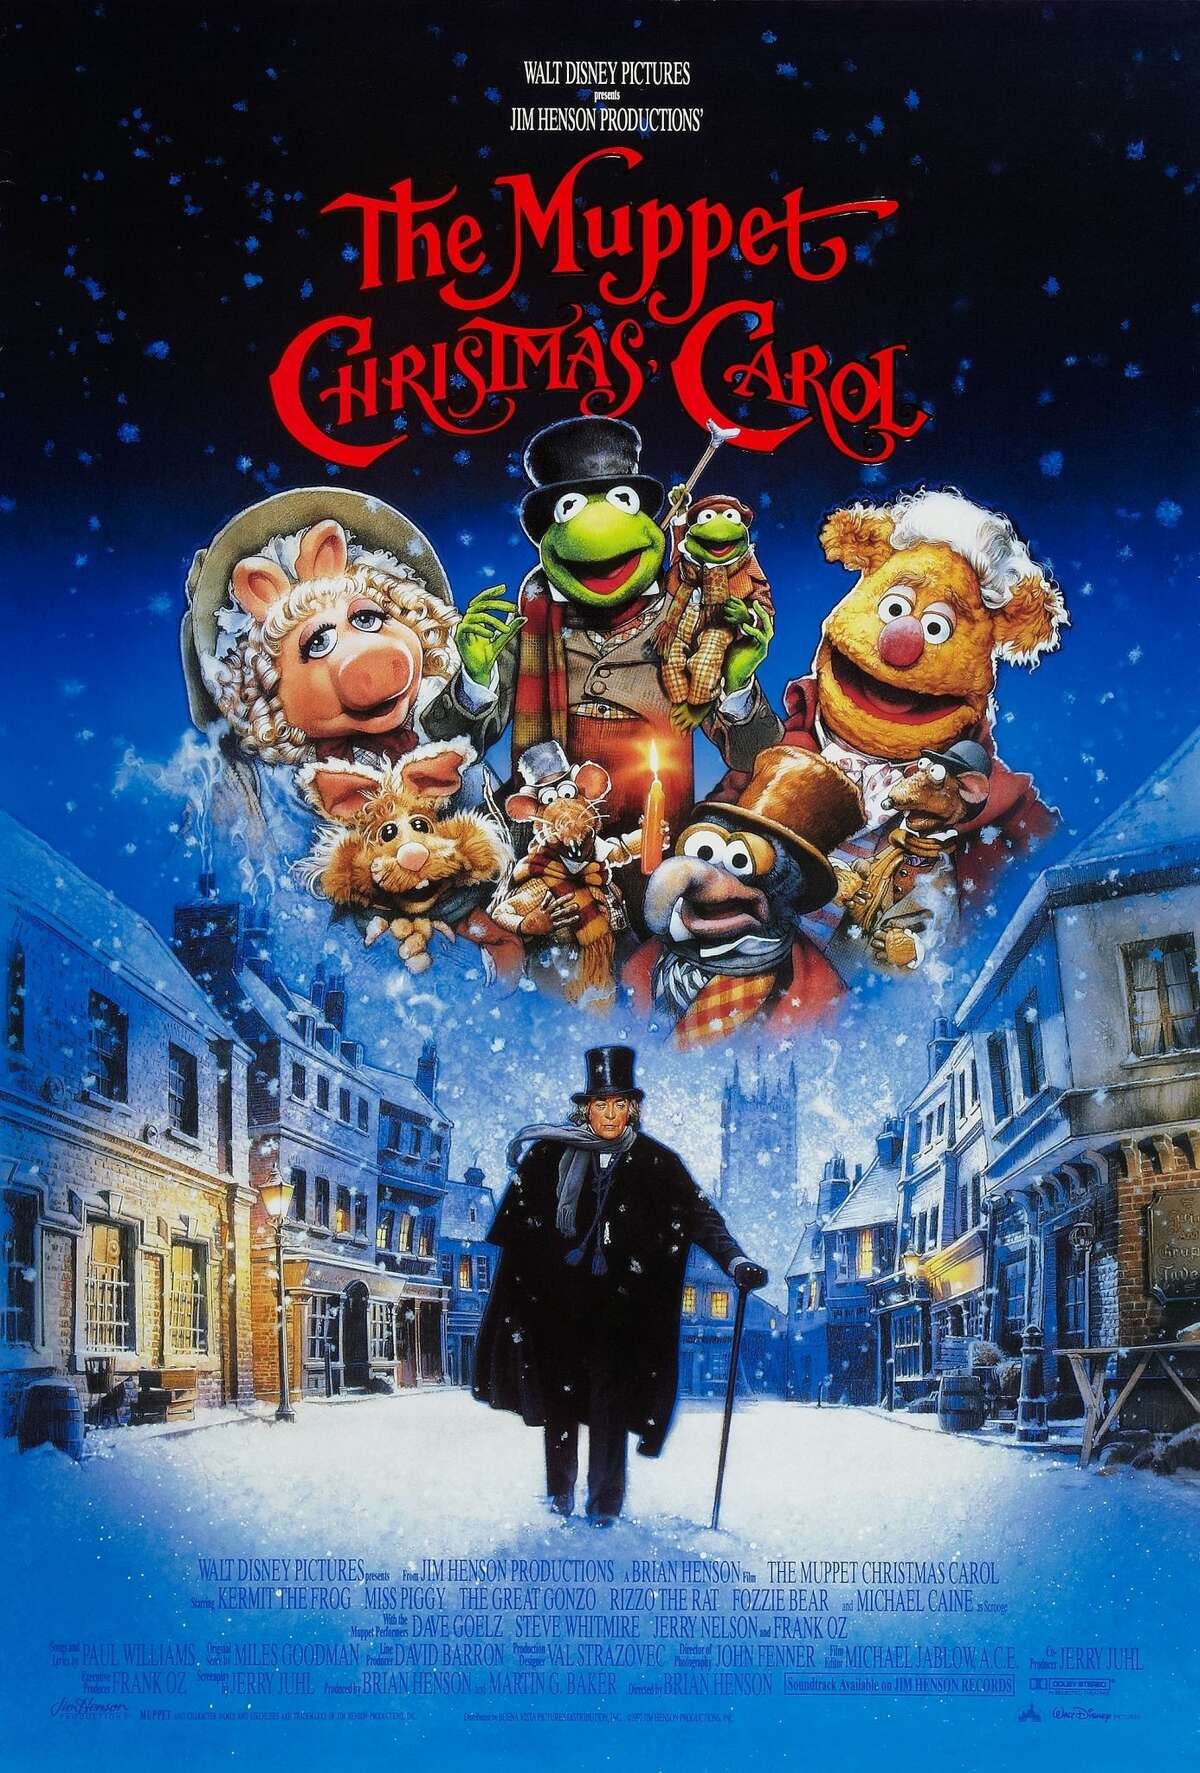 Live music to the Muppet Christmas Carol will be played along with the movie at Powell Symphony Hall. 